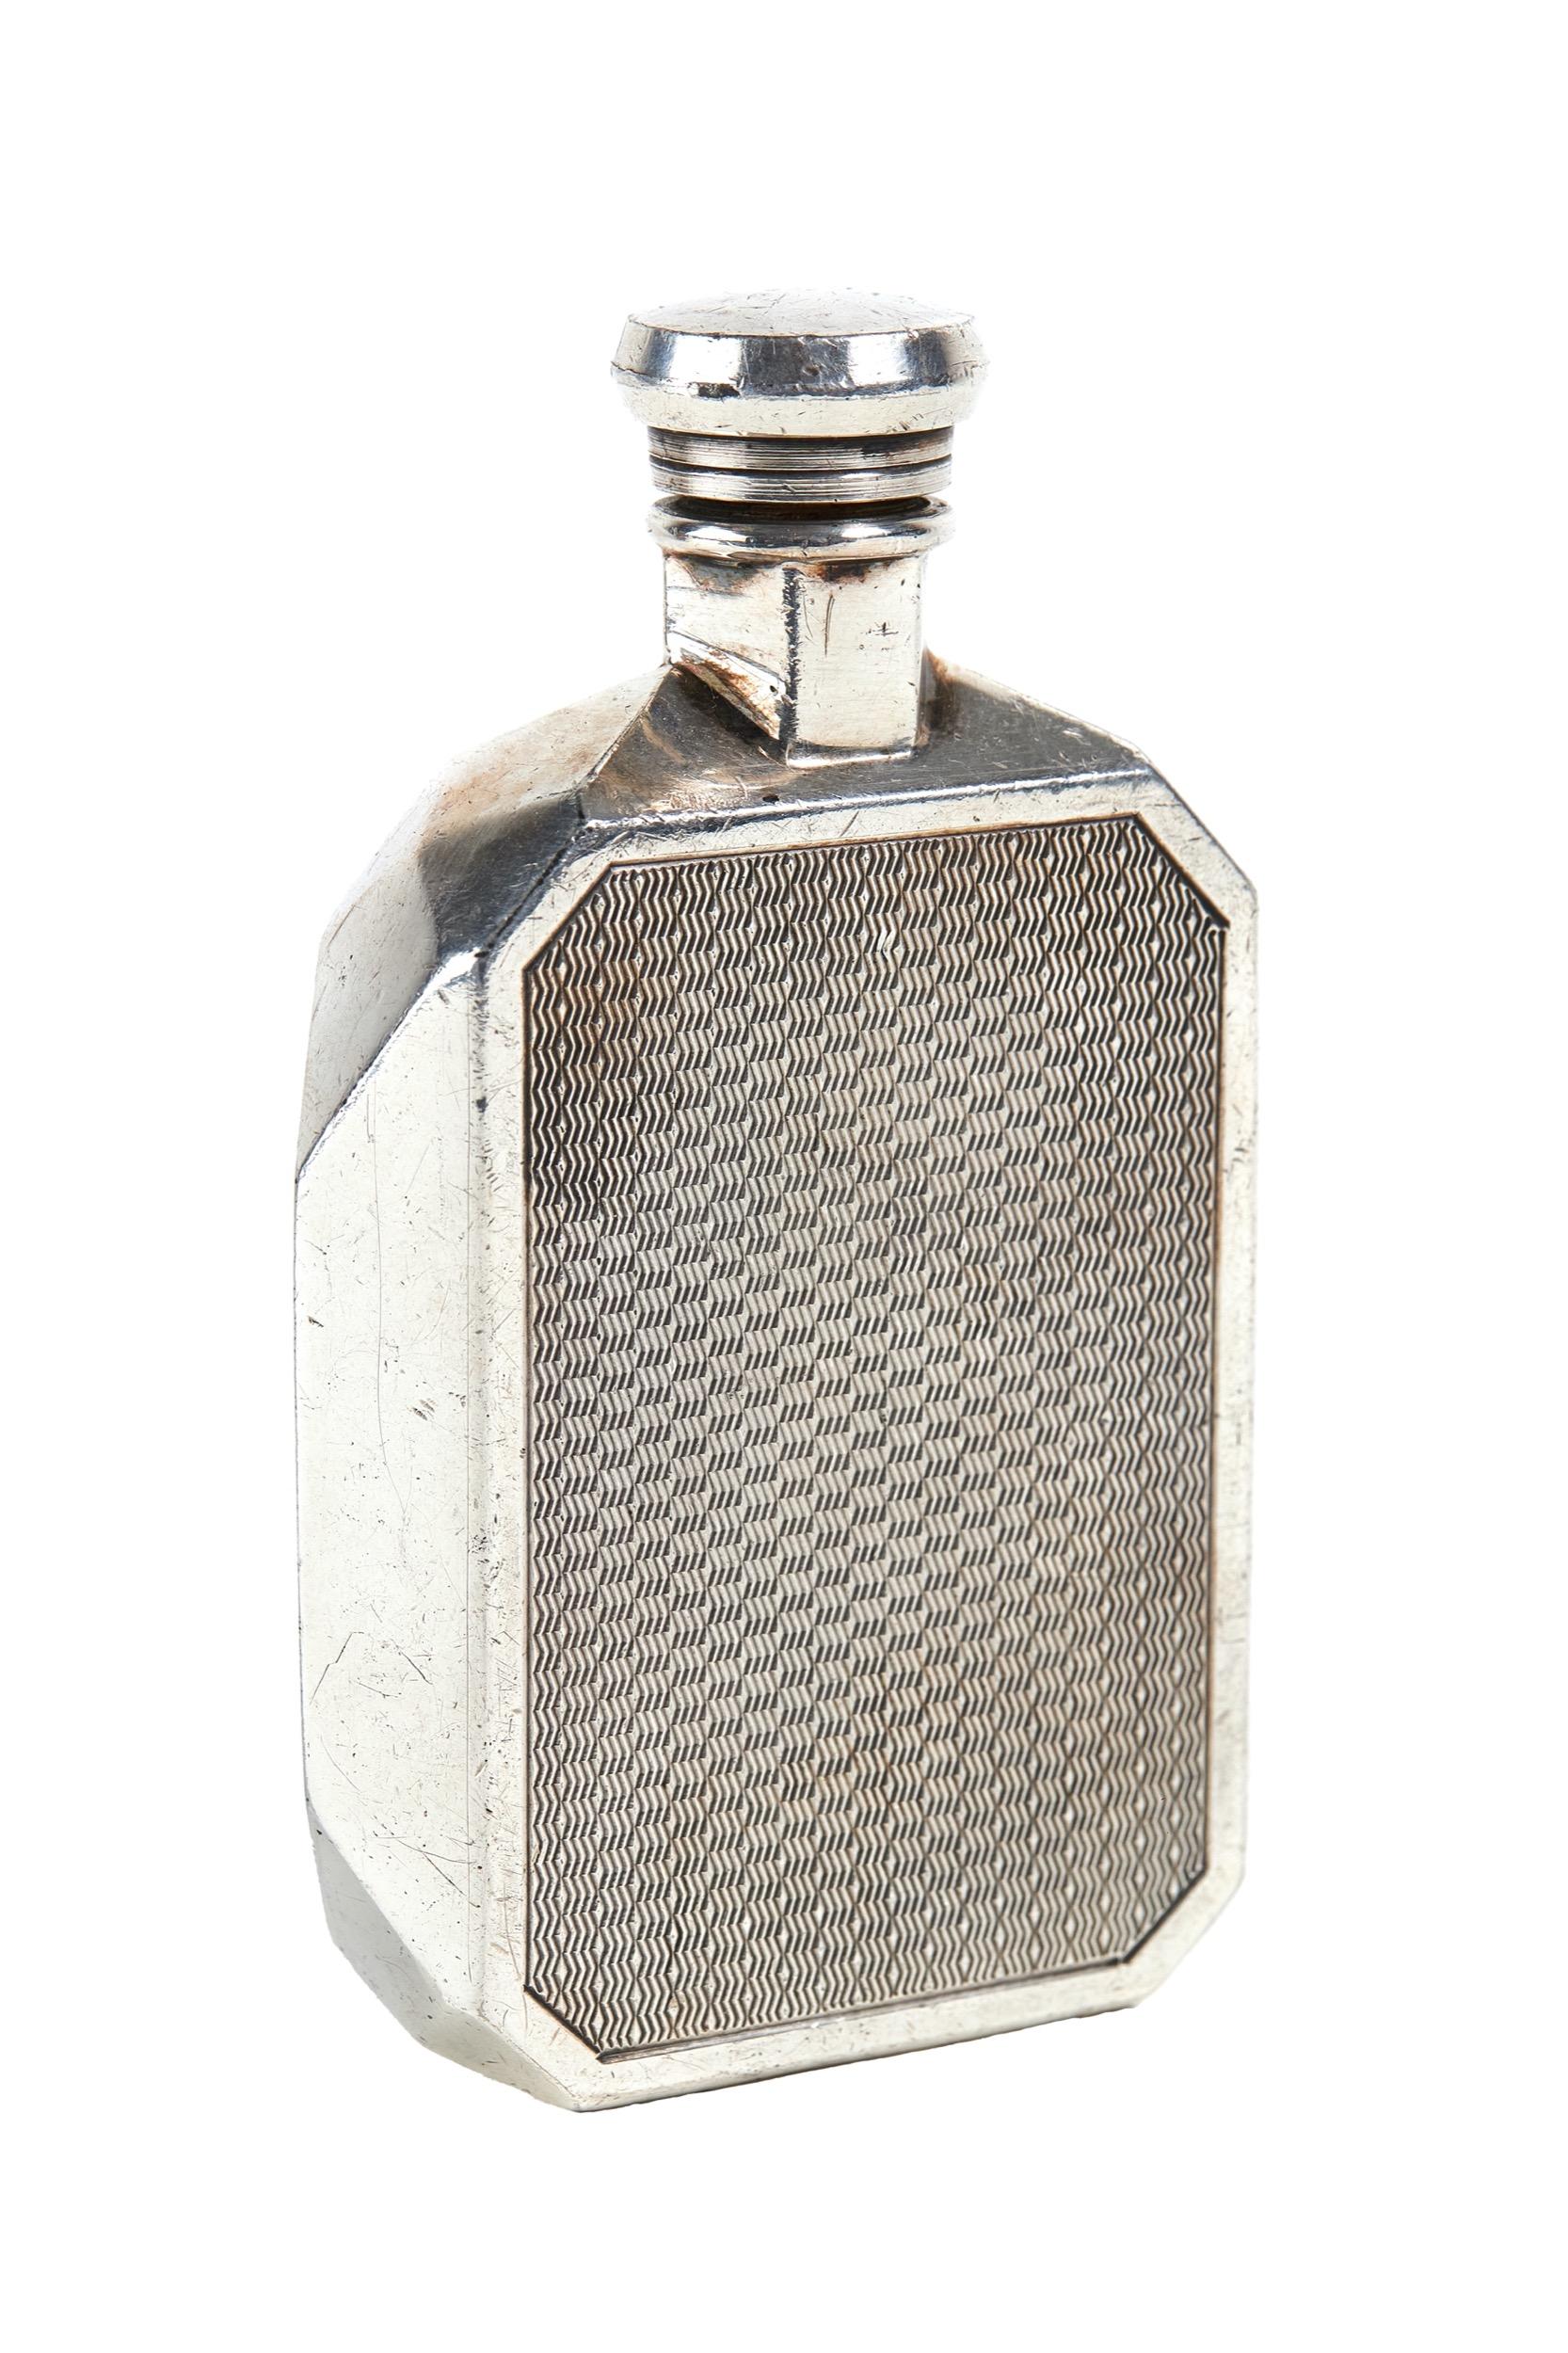 Vintage Silver plated Hip Flask 
In the Form of a 1920s Vintage Car Radiator
Screw cap, 
Stylised radiator shell,
Engine Turned Detail on Radiator Core
by James Dixon & Son Sheffield
stamped on base J D &s with trumpert mark
EPNS MADE IN ENGLAND